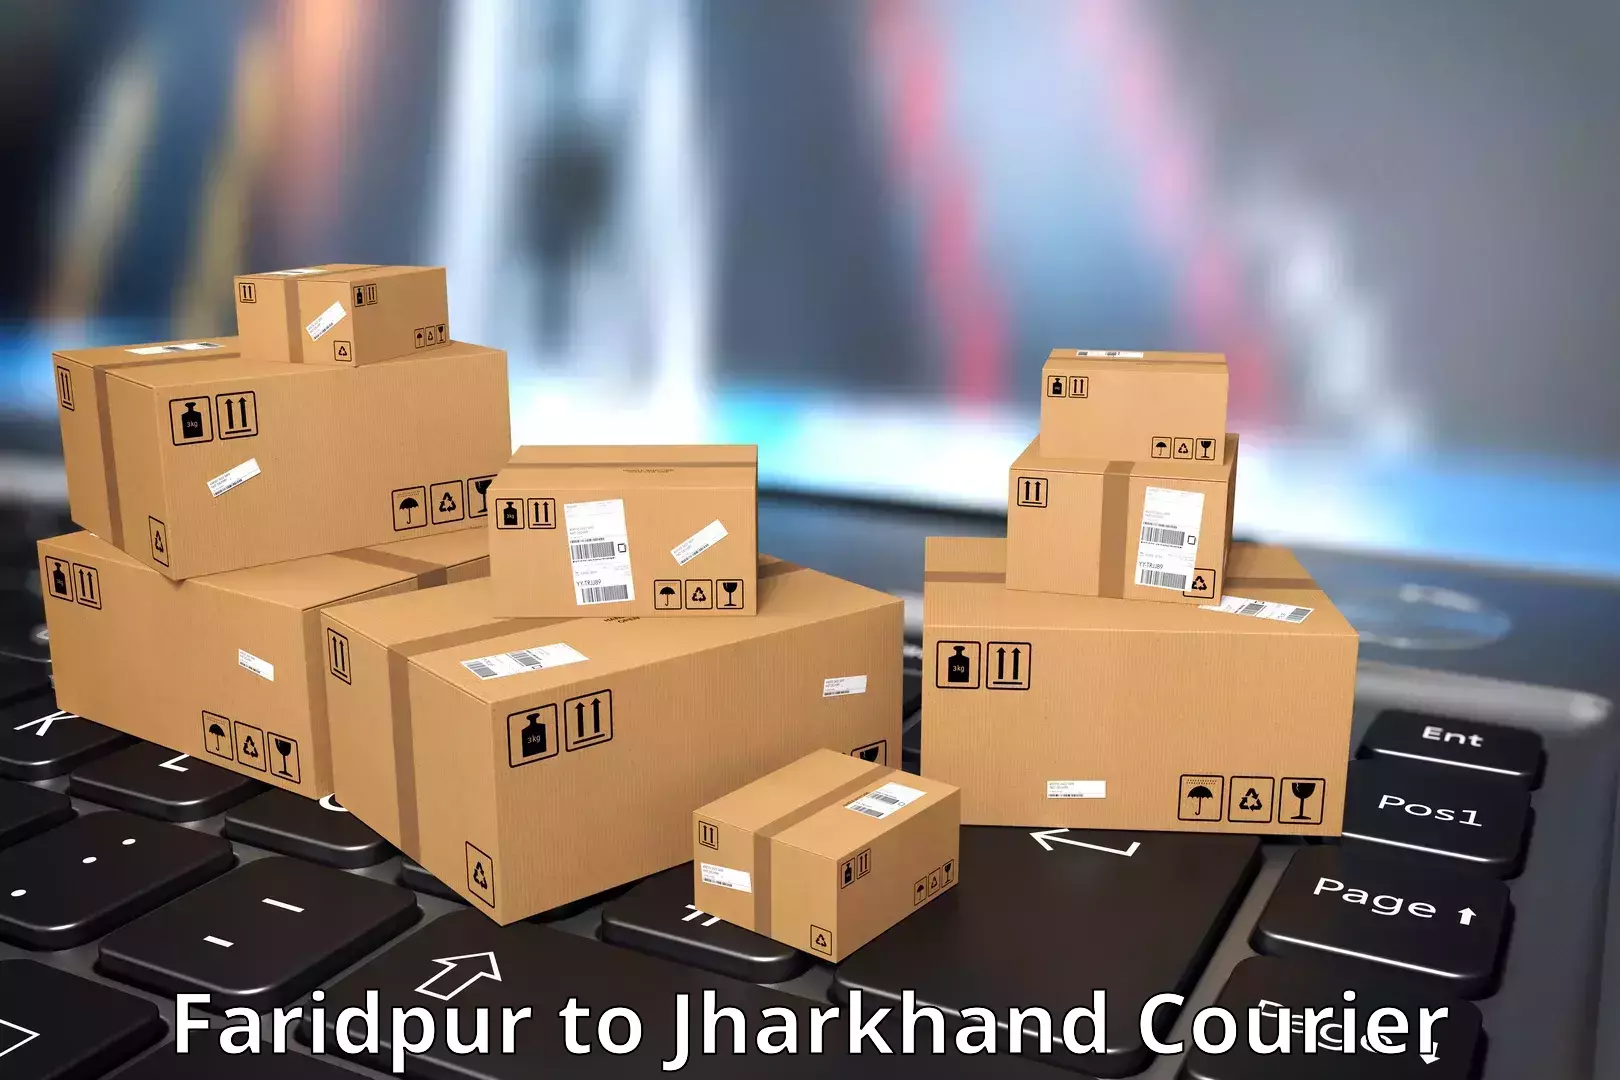 State-of-the-art courier technology Faridpur to Chandil